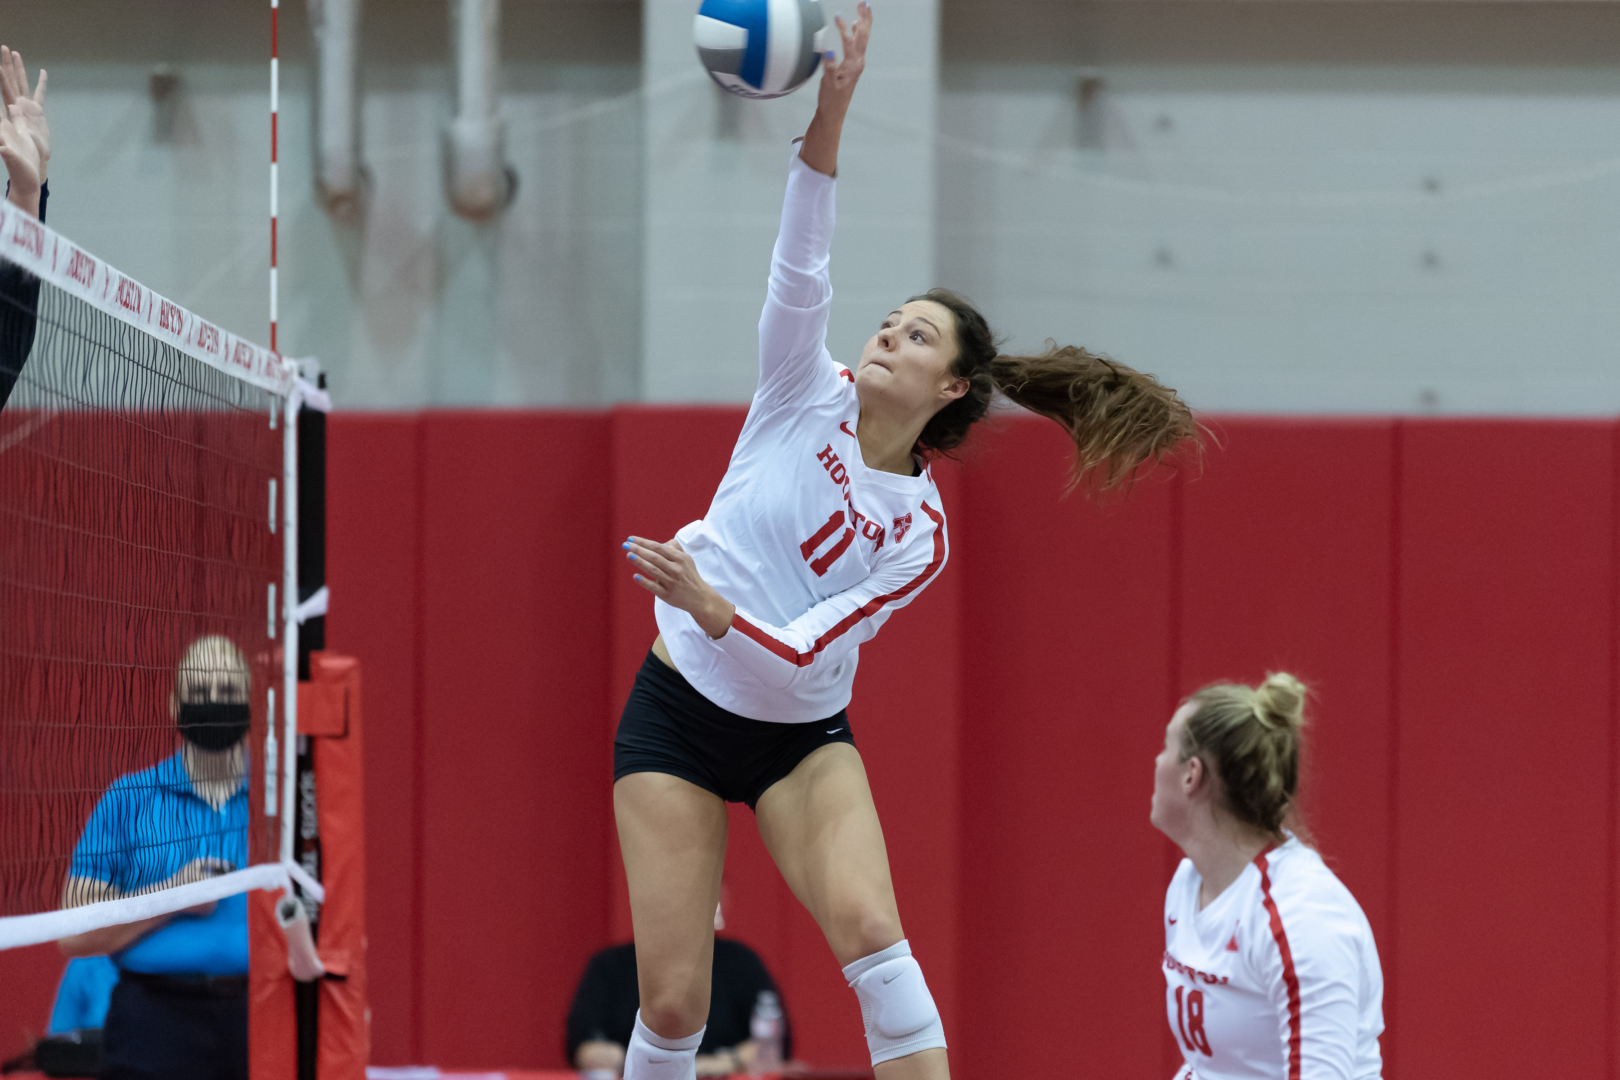 UH volleyball sophomore middle blocker Rachel Tullos extends high for the ball in a game against Rice during the 2020-21 season. | Courtesy of UH athletics